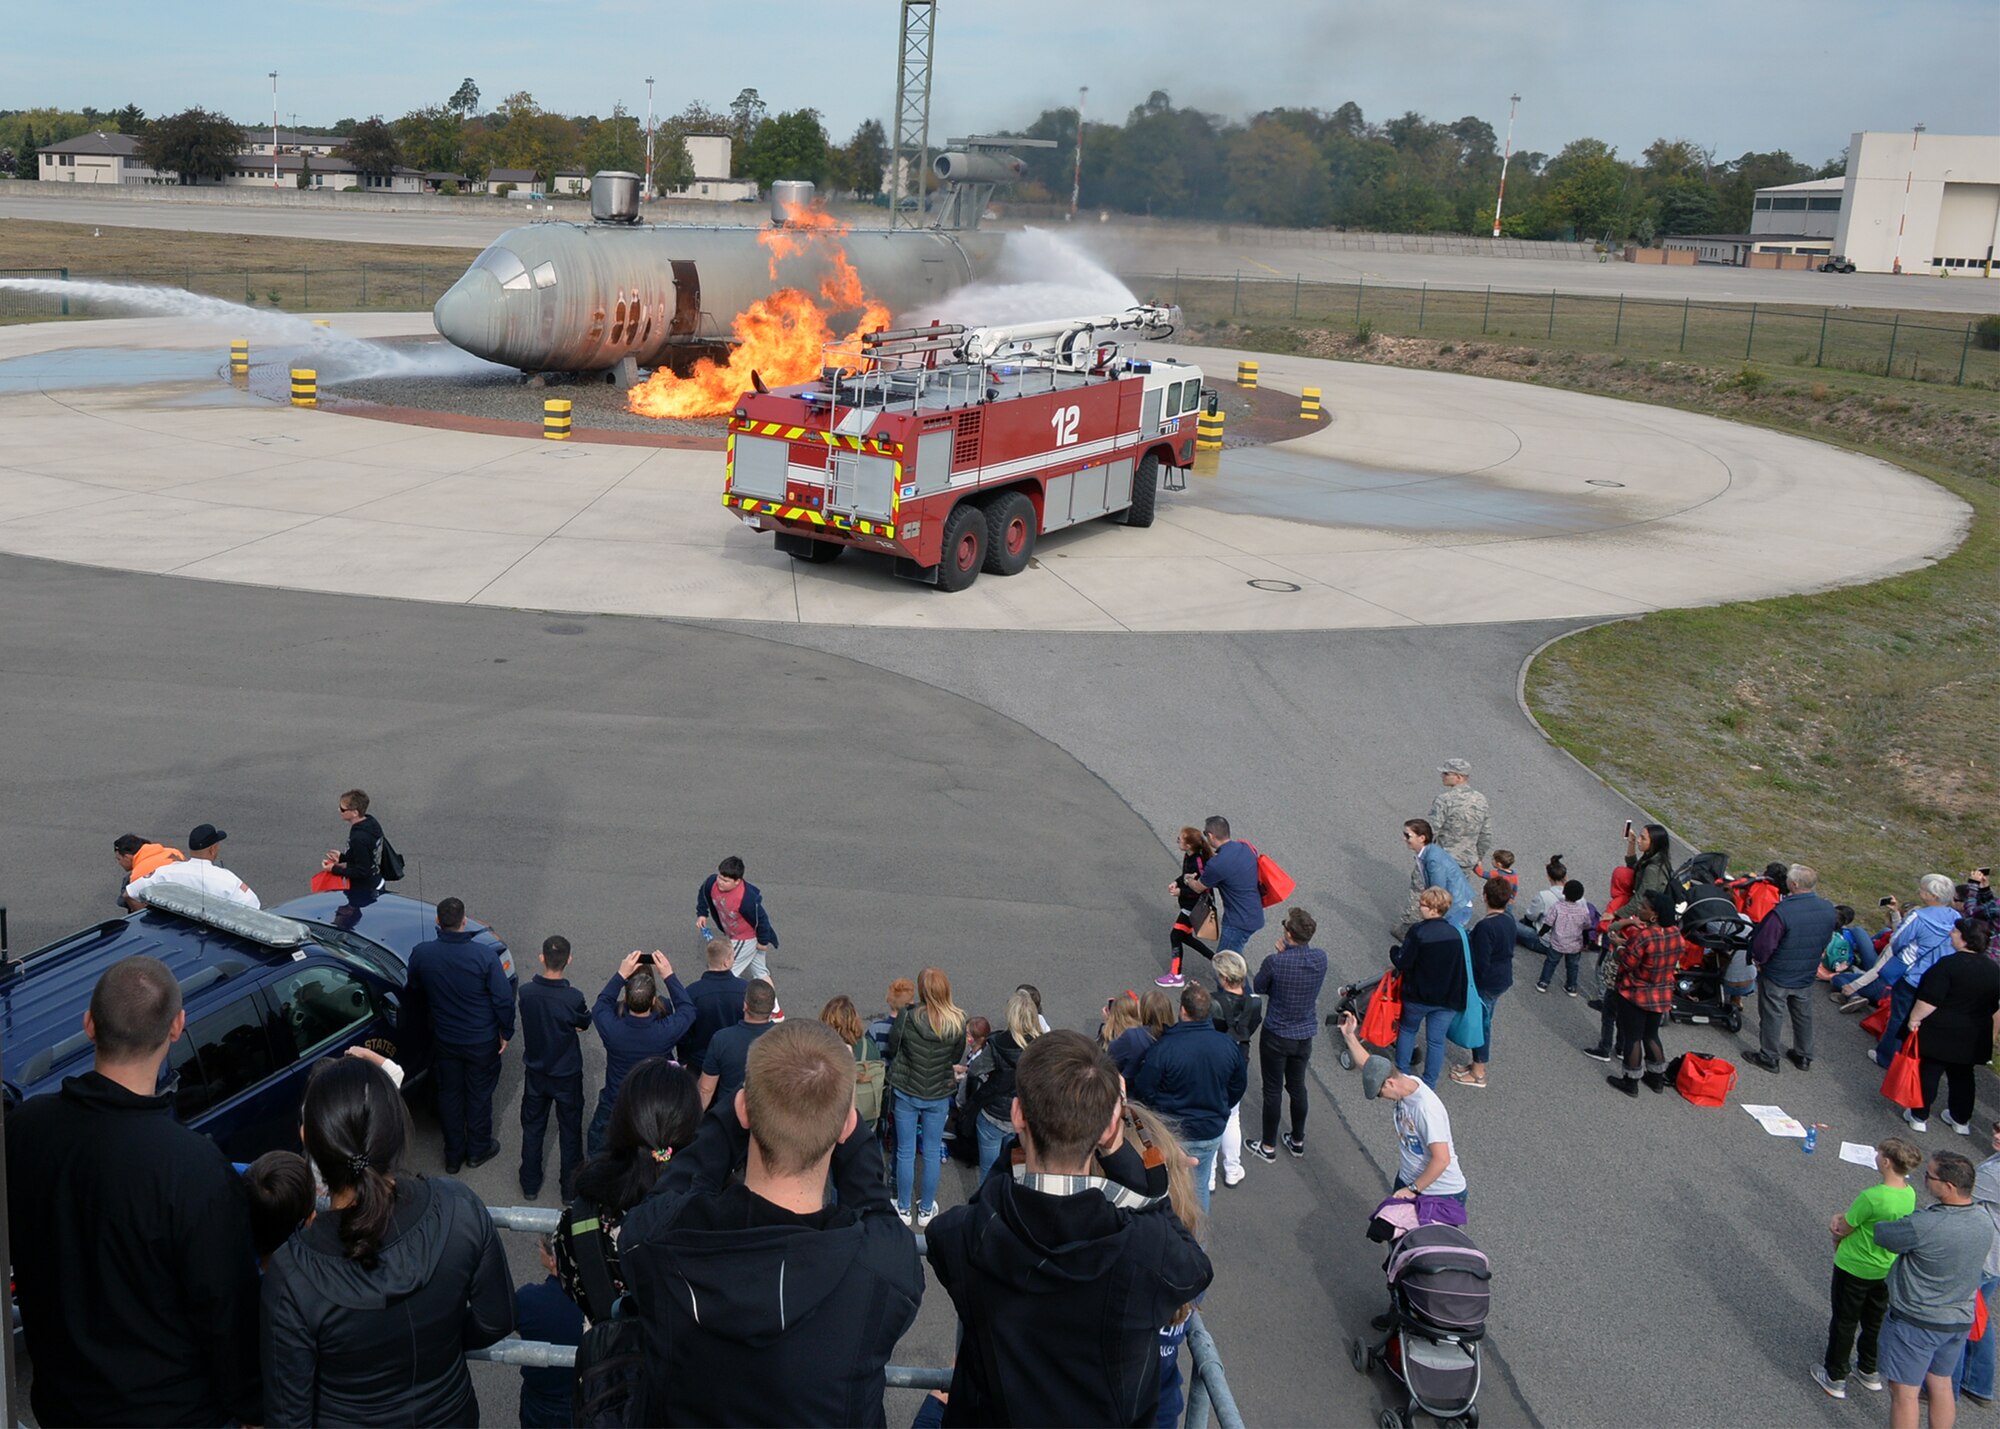 Attendees watch as firefighters assigned to the 86th Civil Engineer Squadron fight a simulated aircraft fire on Ramstein Air Base, Germany, Oct. 6, 2018. Firefighters demonstrated their capabilities for members of the Kaiserslautern Military Community as part of the fire department’s open house to kick off Fire Prevention Week. (U.S. Air Force photo by Staff Sgt. Jimmie D. Pike)